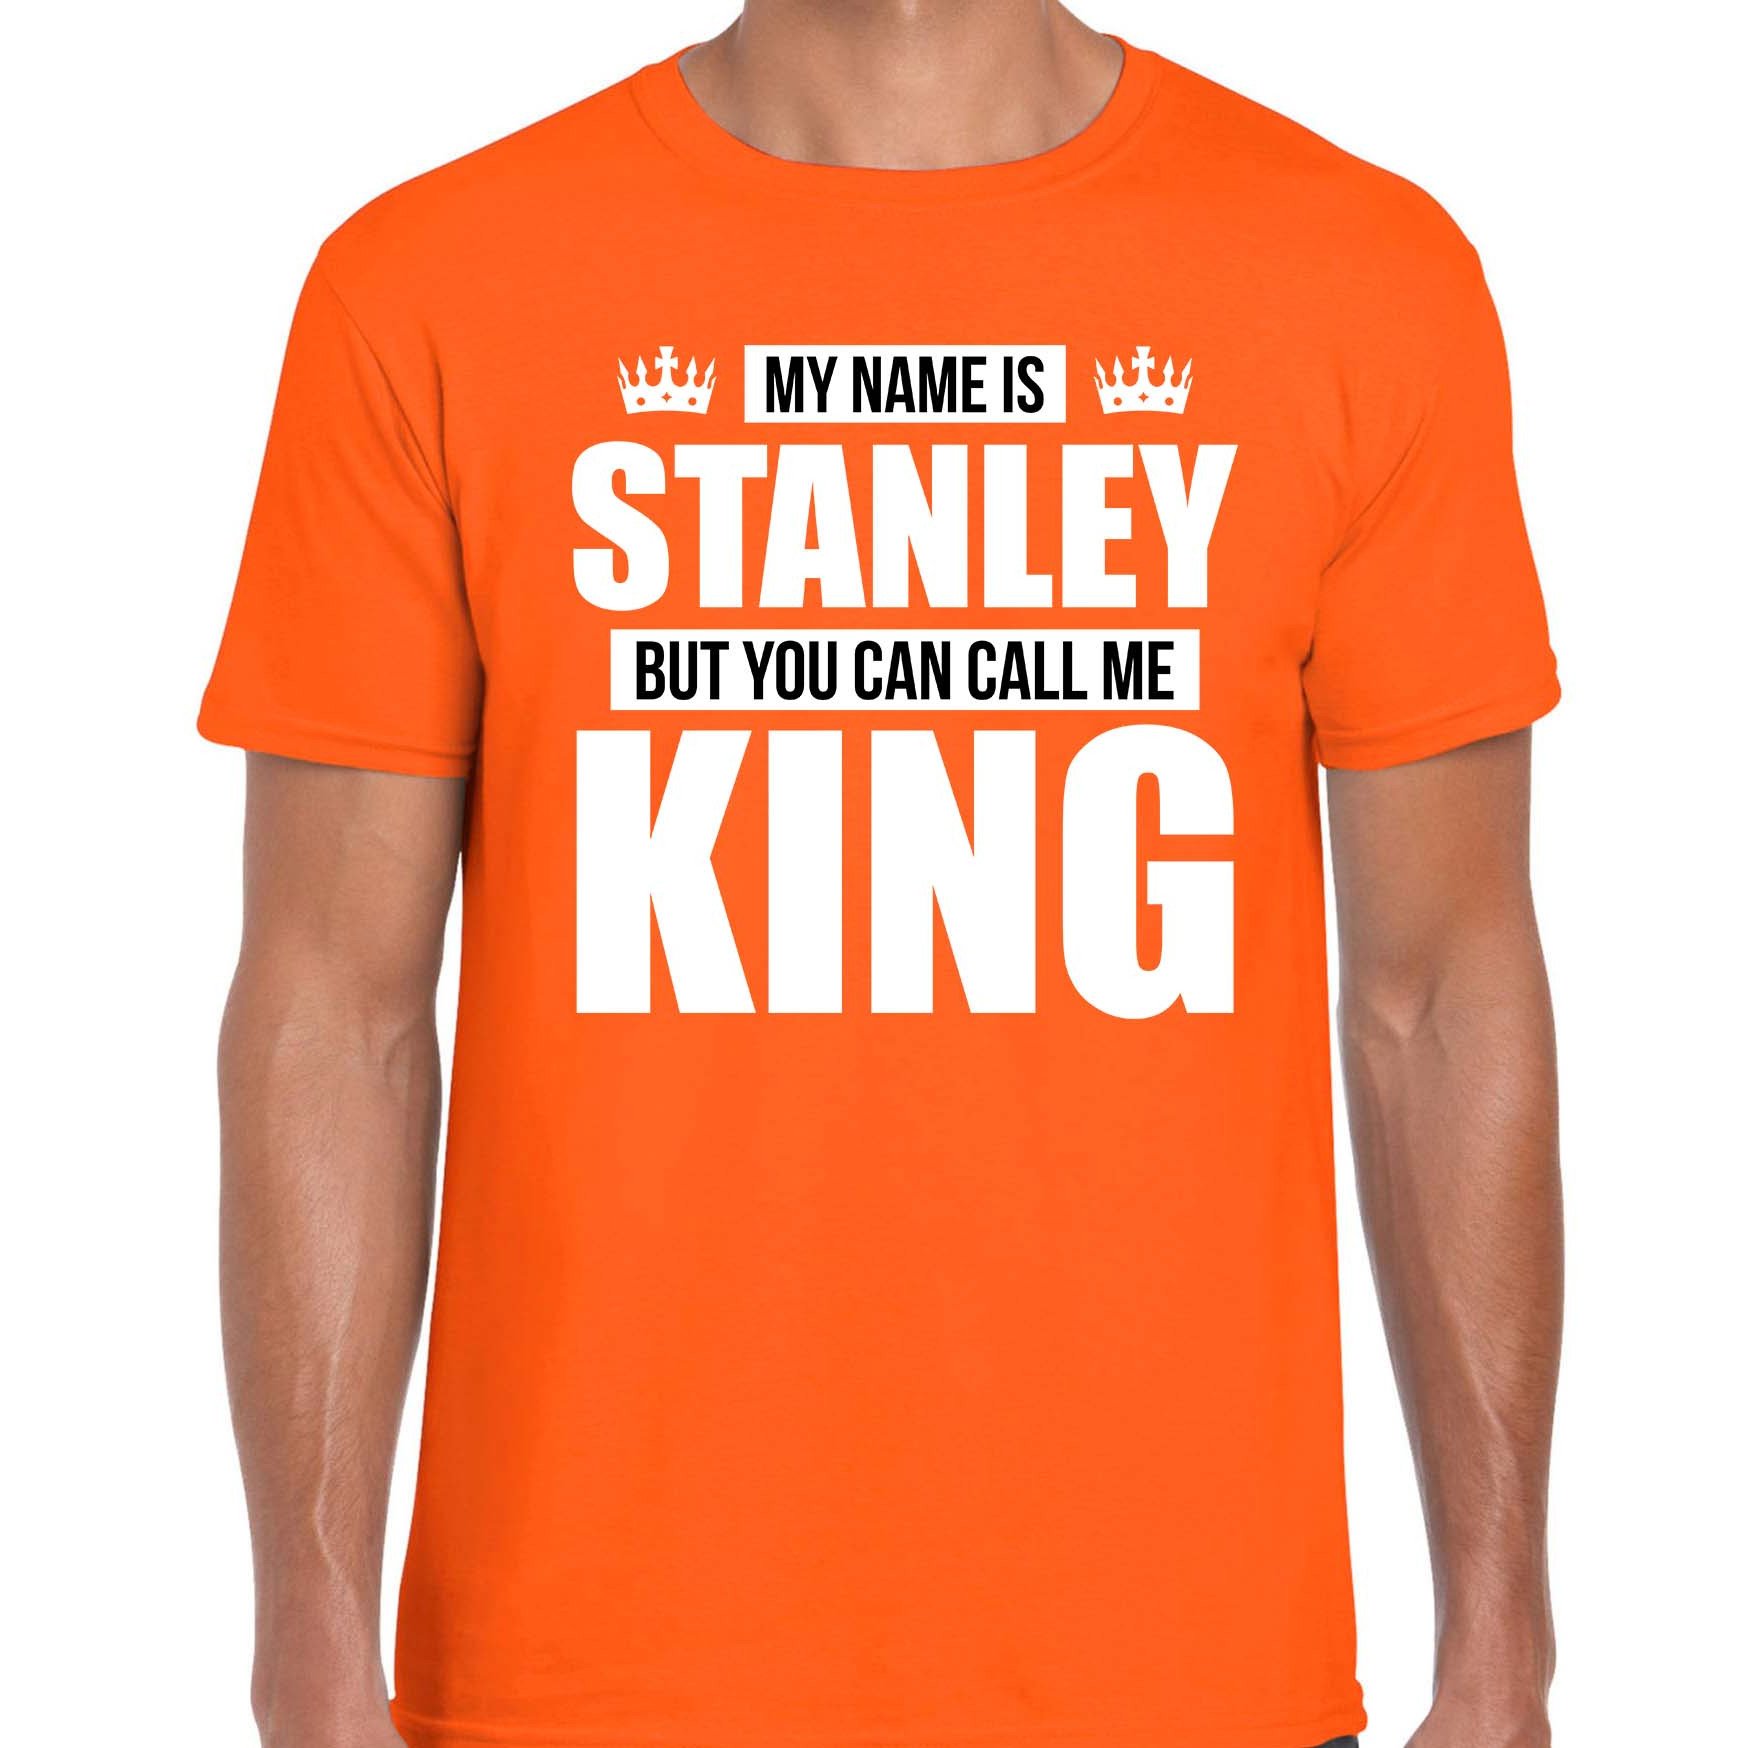 Naam My name is Stanley but you can call me King shirt oranje cadeau shirt